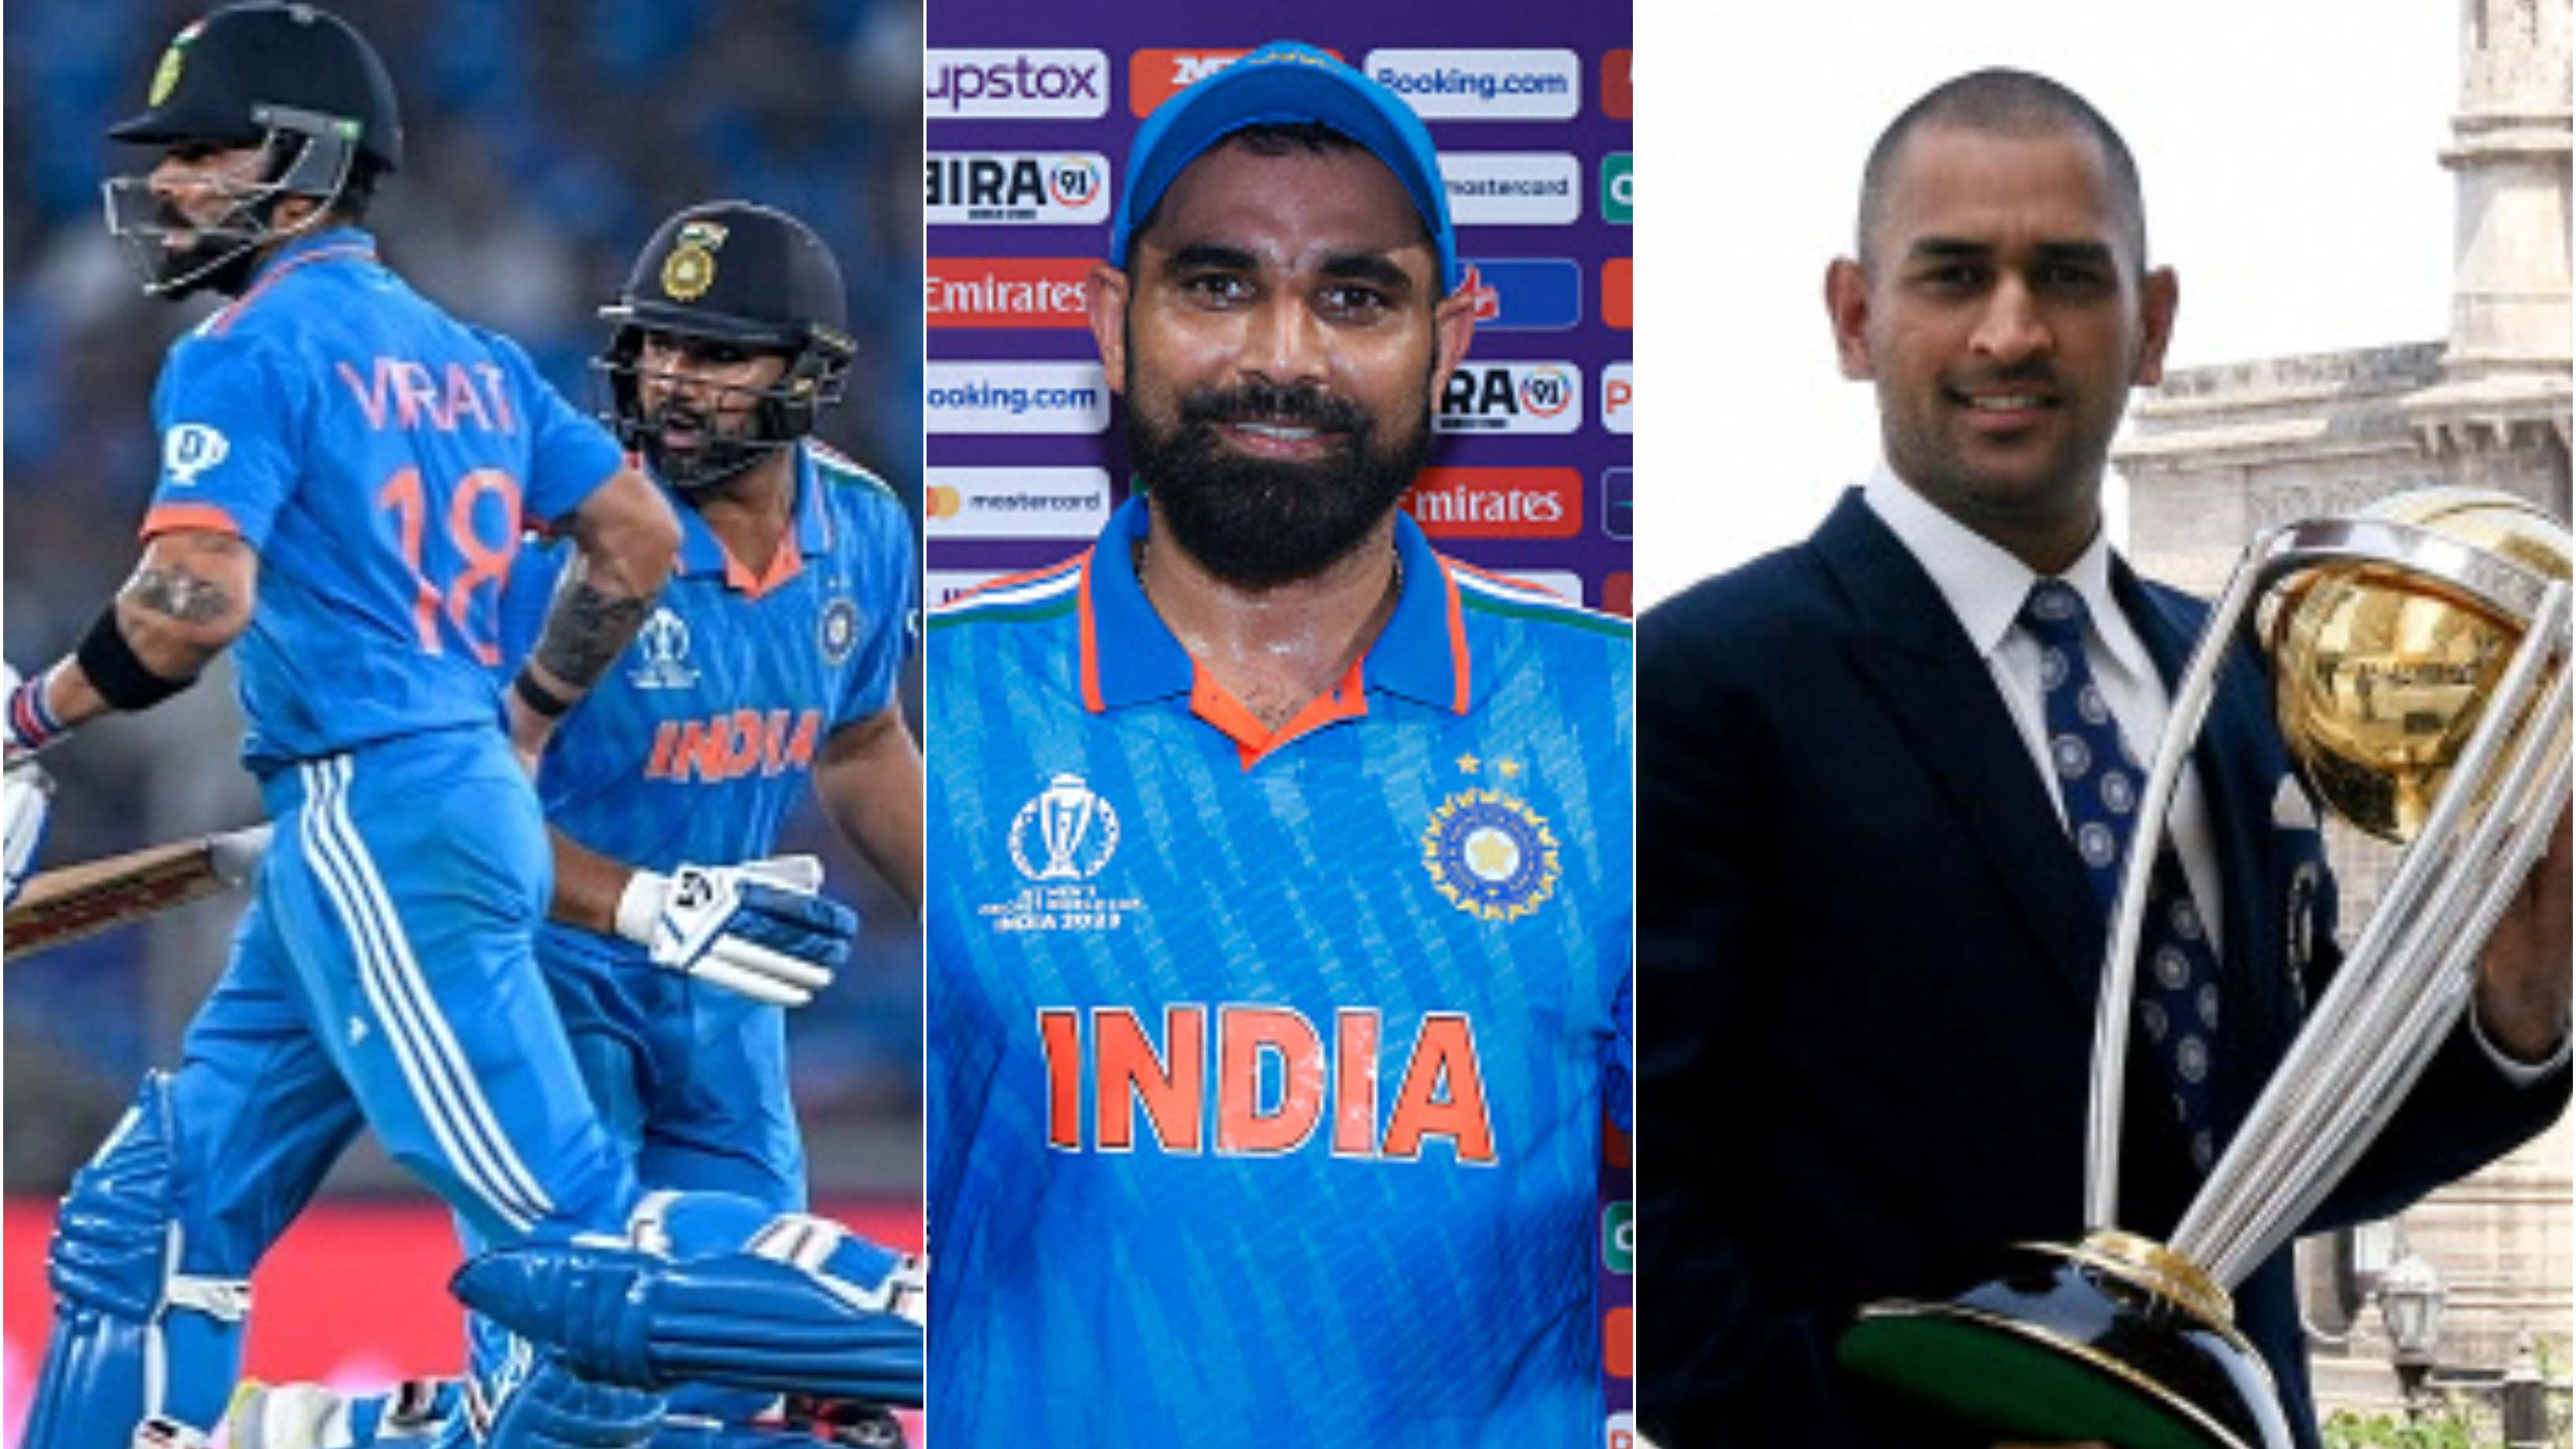 Shami picks Kohli as the best and Rohit as most dangerous batter, but names Dhoni as best captain